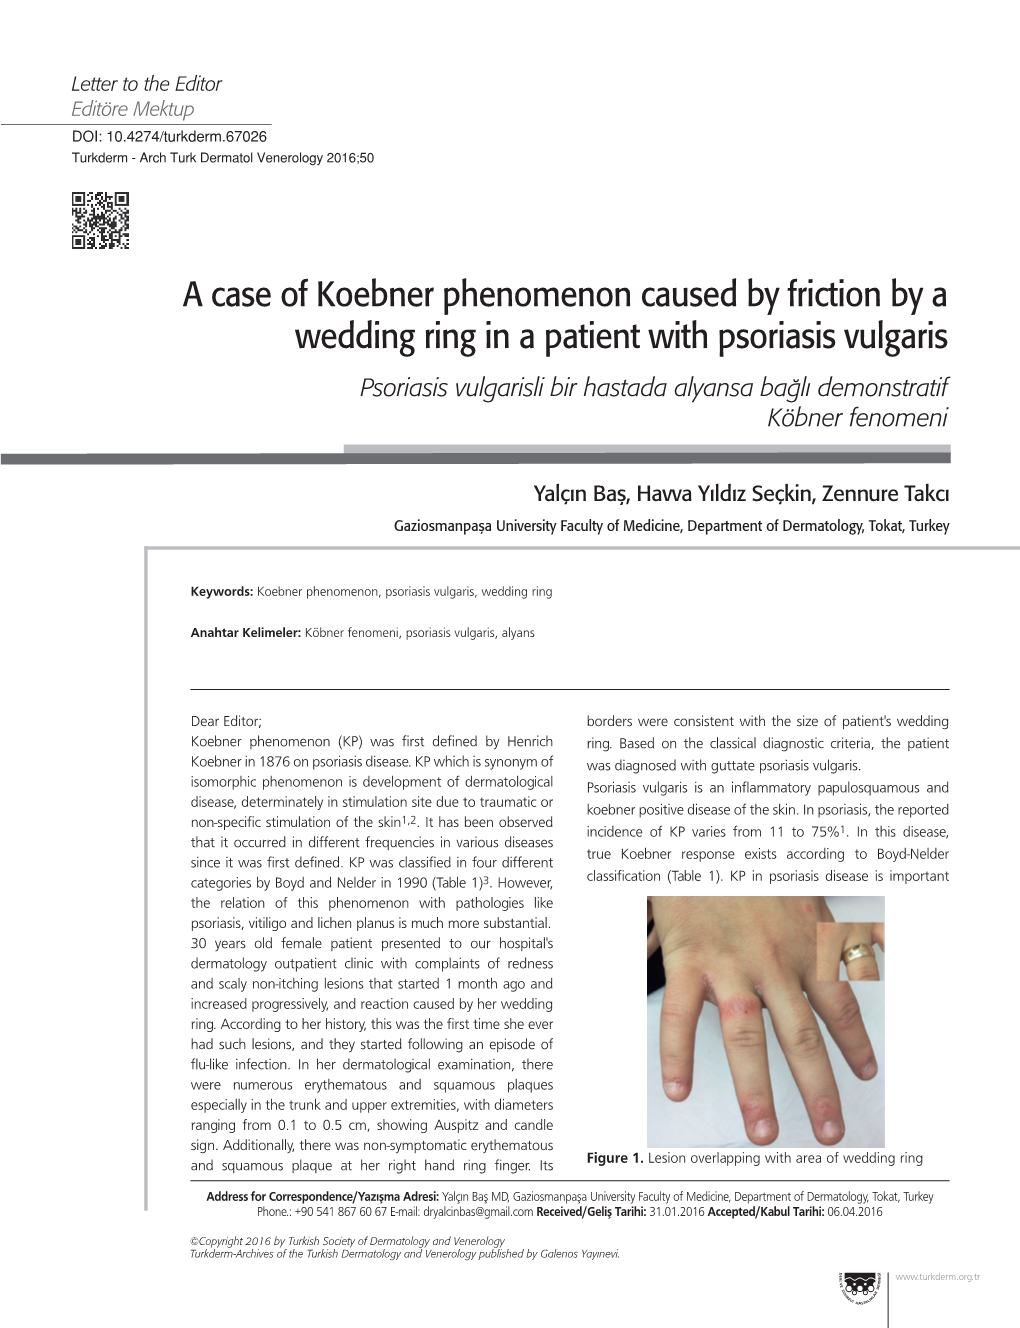 A Case of Koebner Phenomenon Caused by Friction by a Wedding Ring in a Patient with Psoriasis Vulgaris